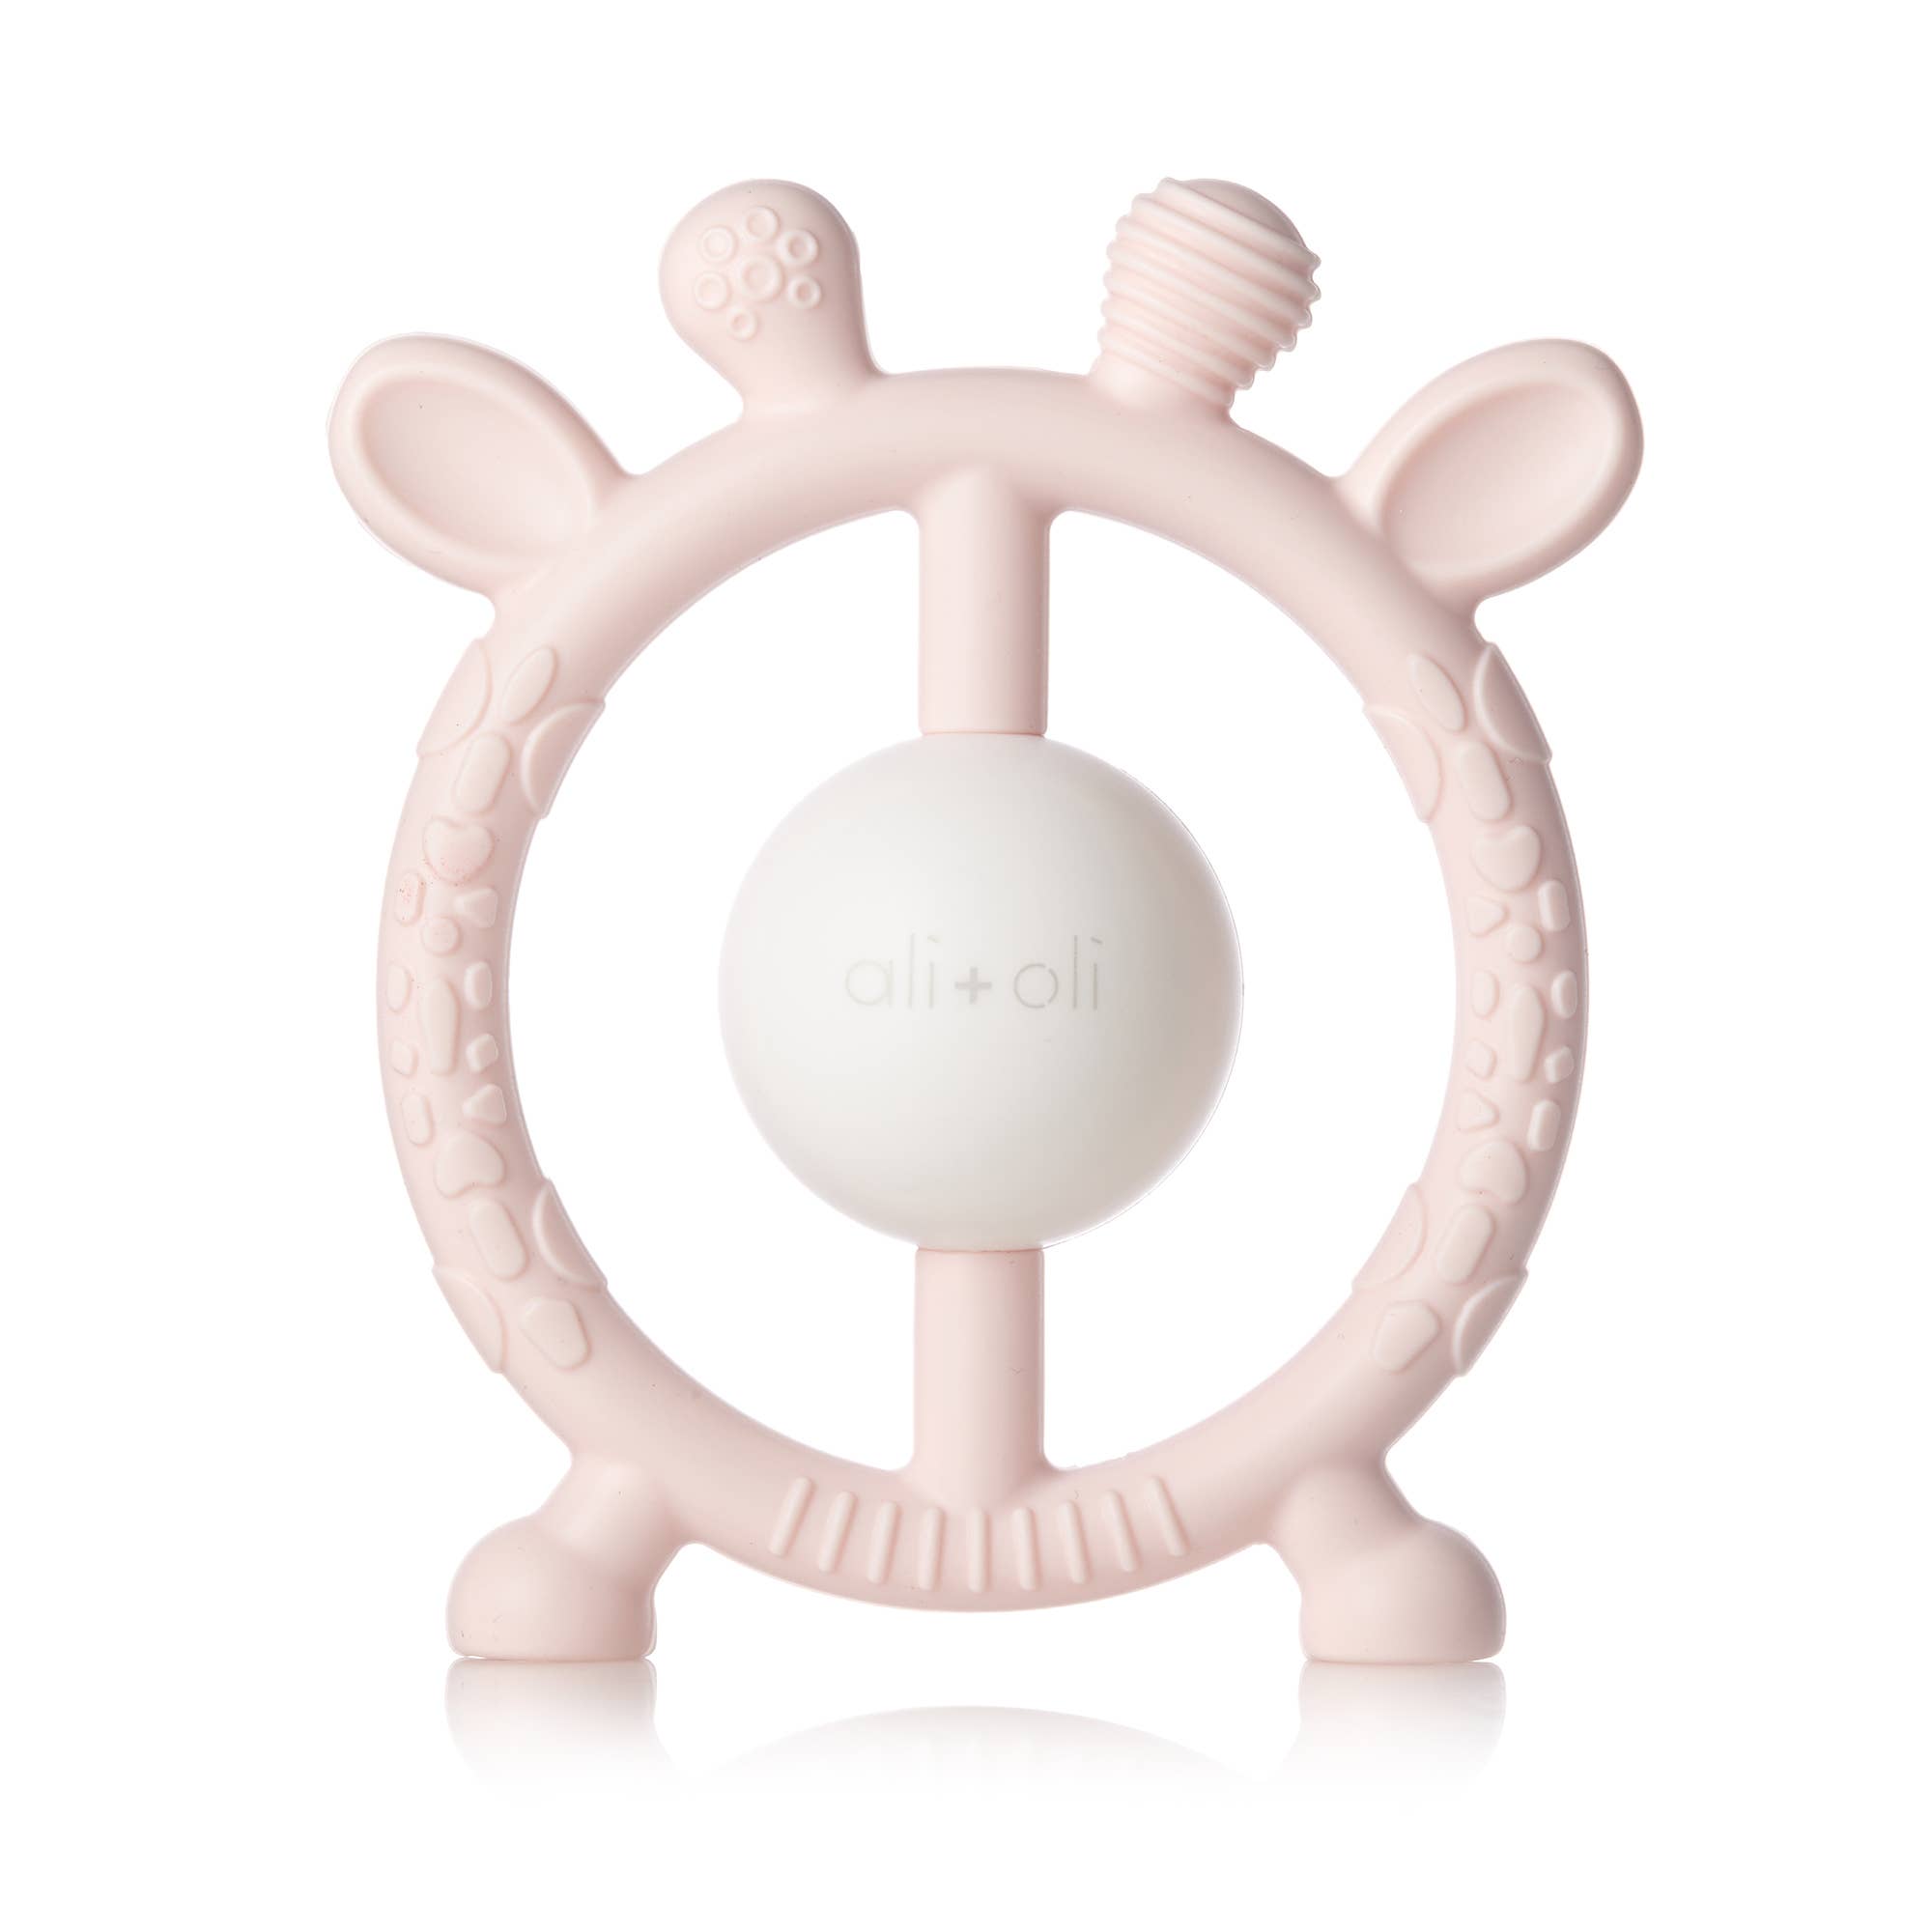 Giraffe Teether & Rattle Food-Grade Silicone Toy (Pink)